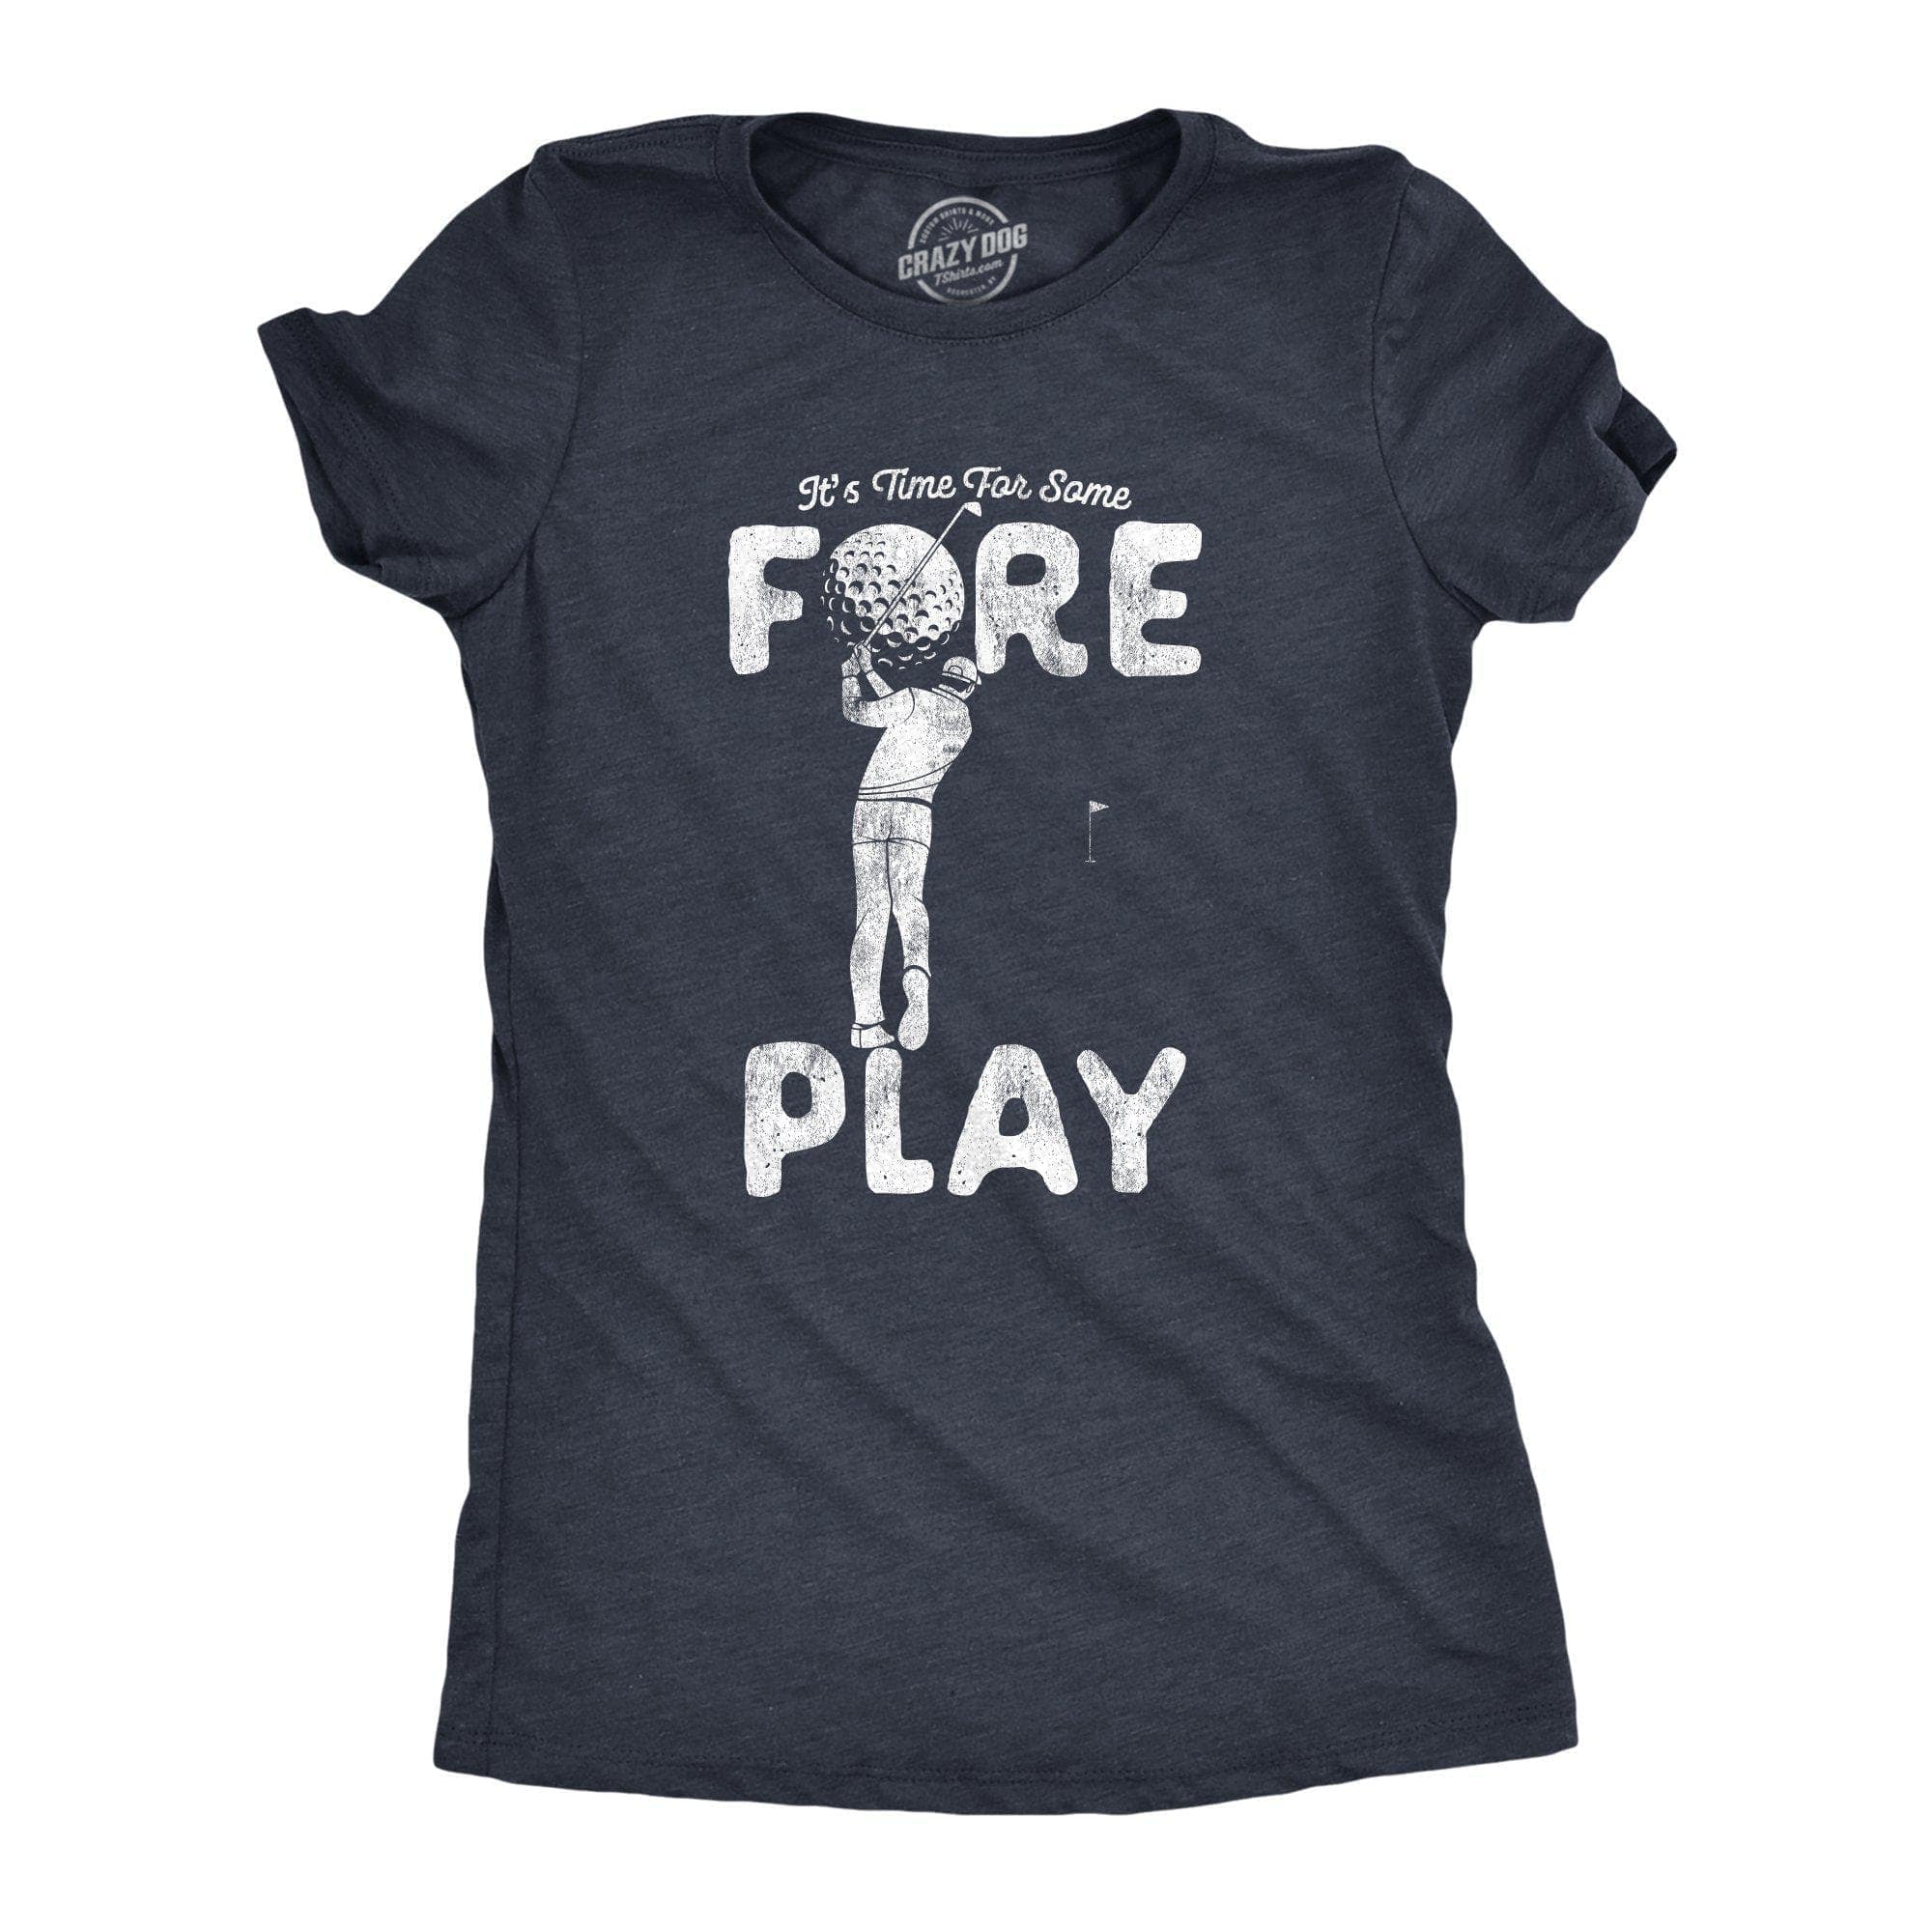 Time For Some Foreplay Women's Tshirt - Crazy Dog T-Shirts